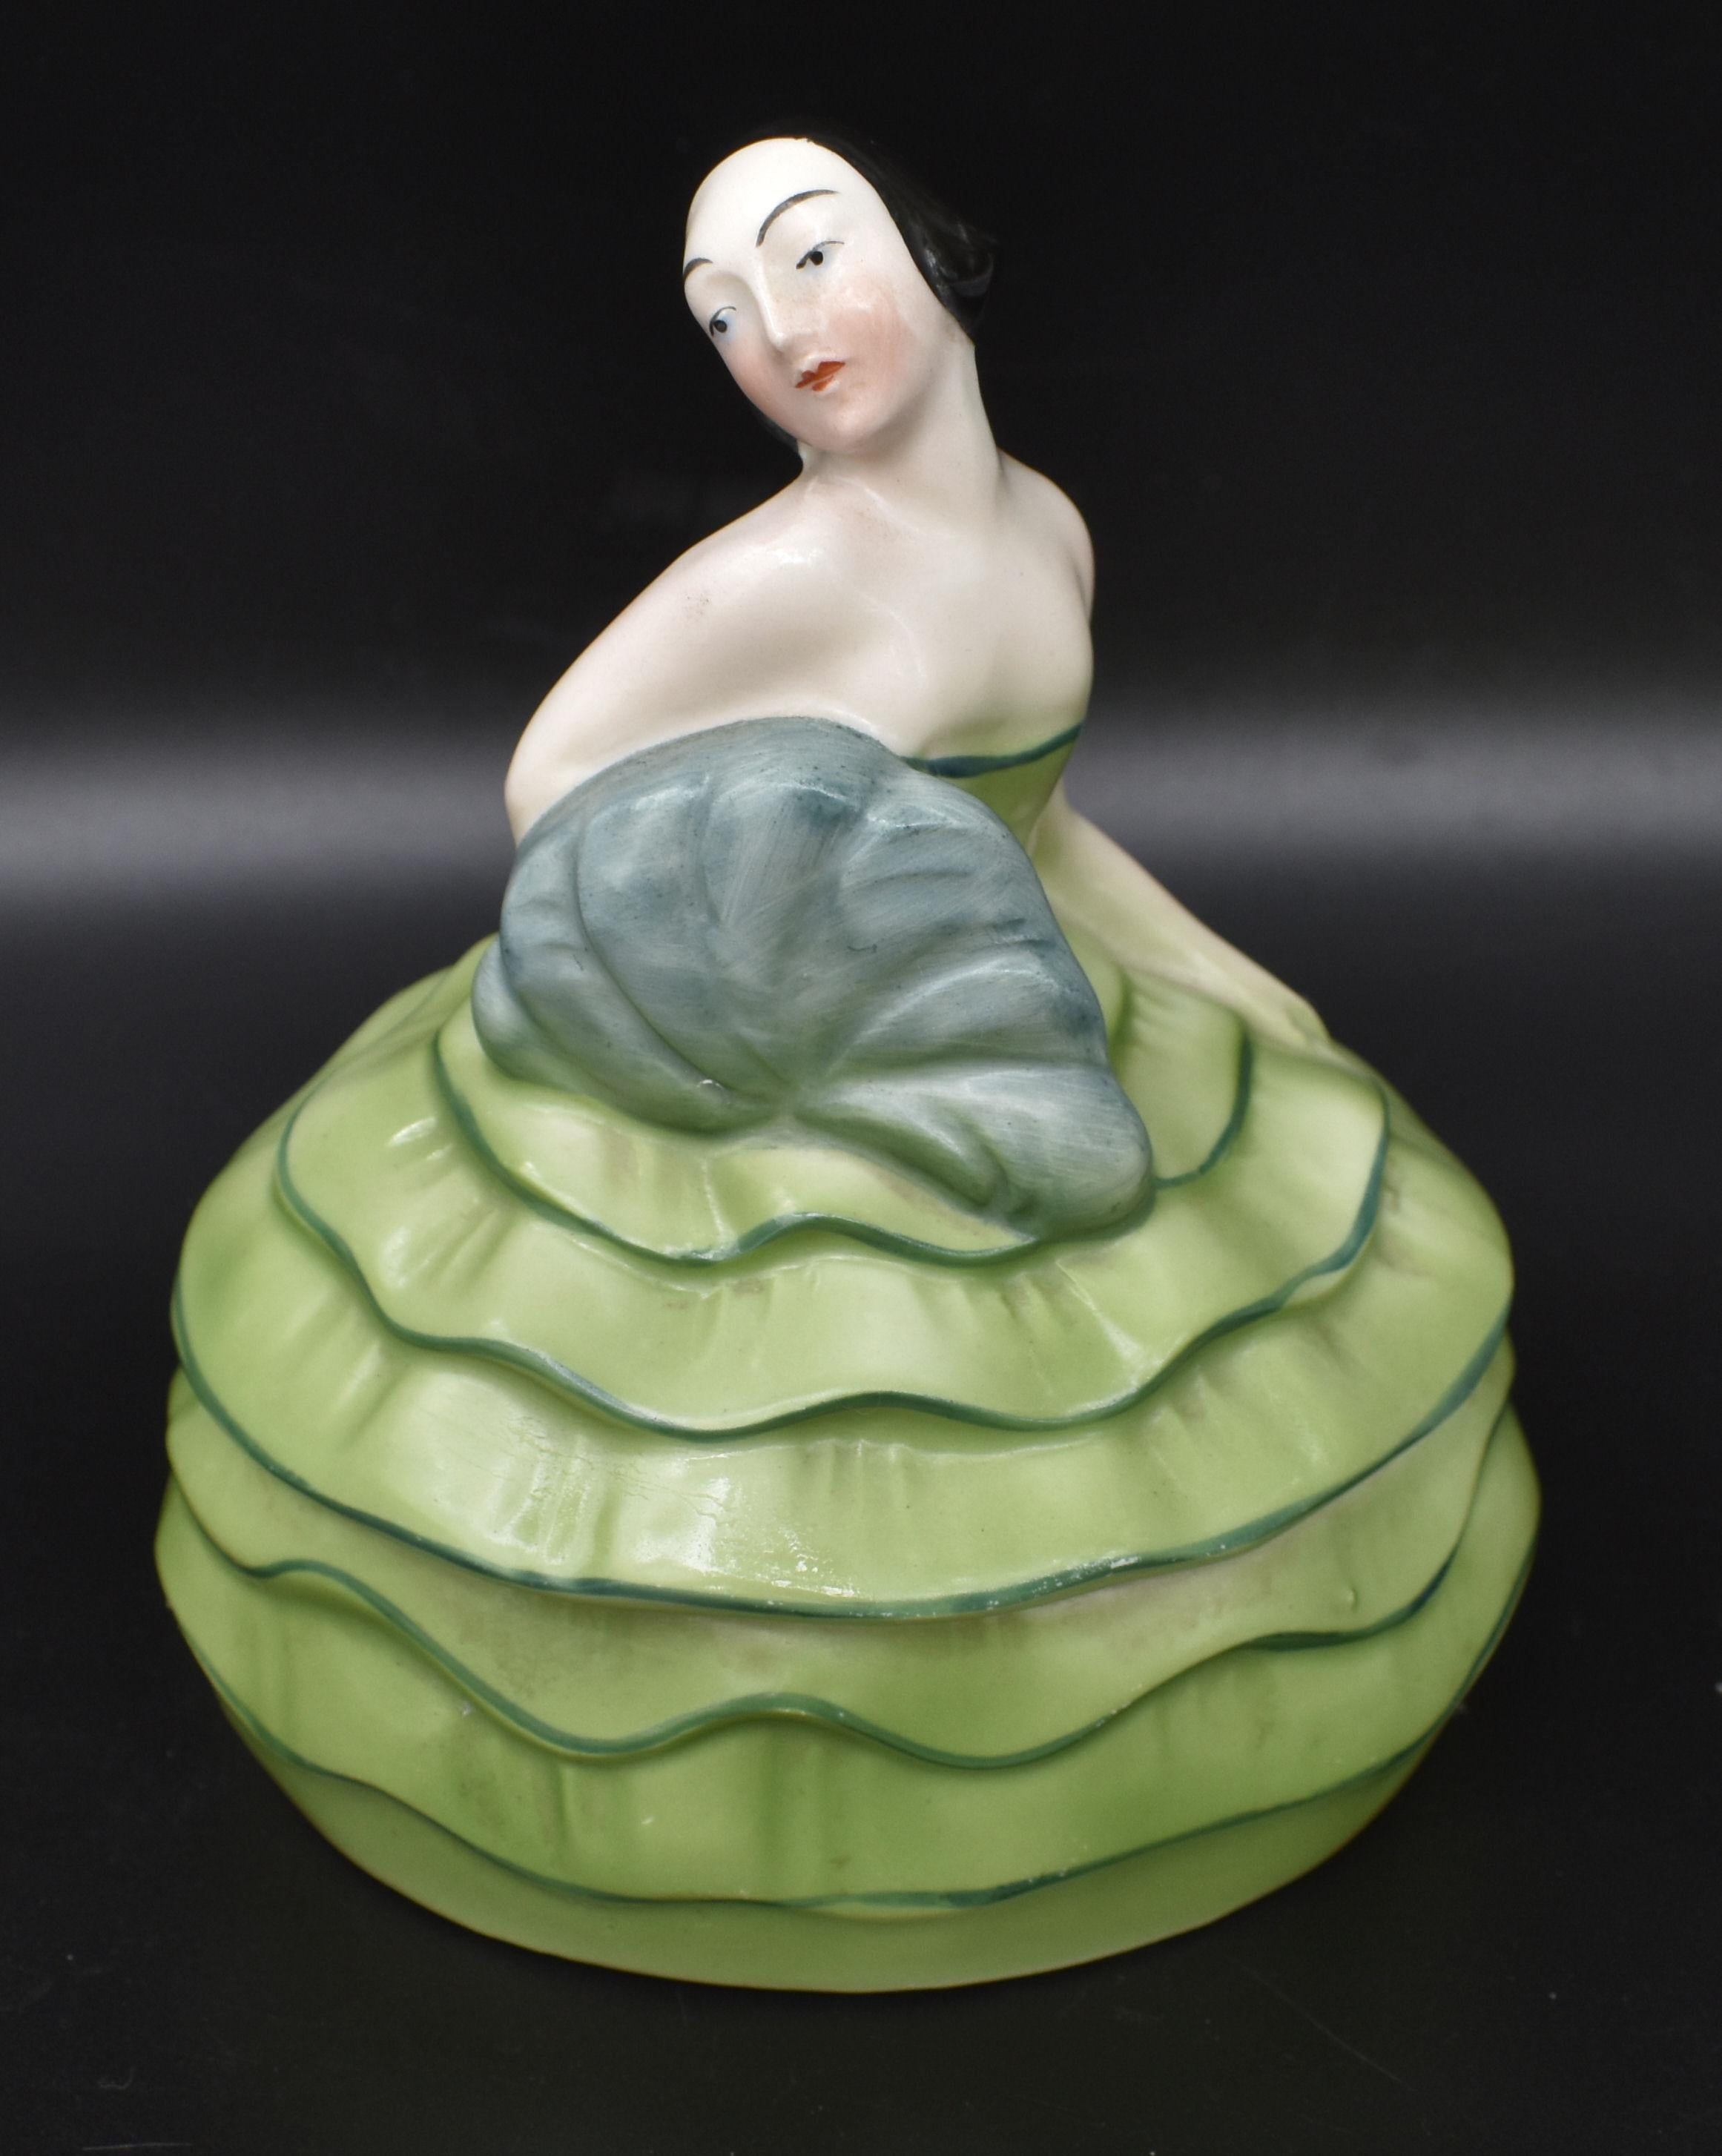 For your consideration is this very attractive and totally original 1930's Art Deco ladies powder/ trinket box. Made from ceramic with a vibrantly colored painted finish. Highly functional, collectable and decorative. A lovely piece. She's free from